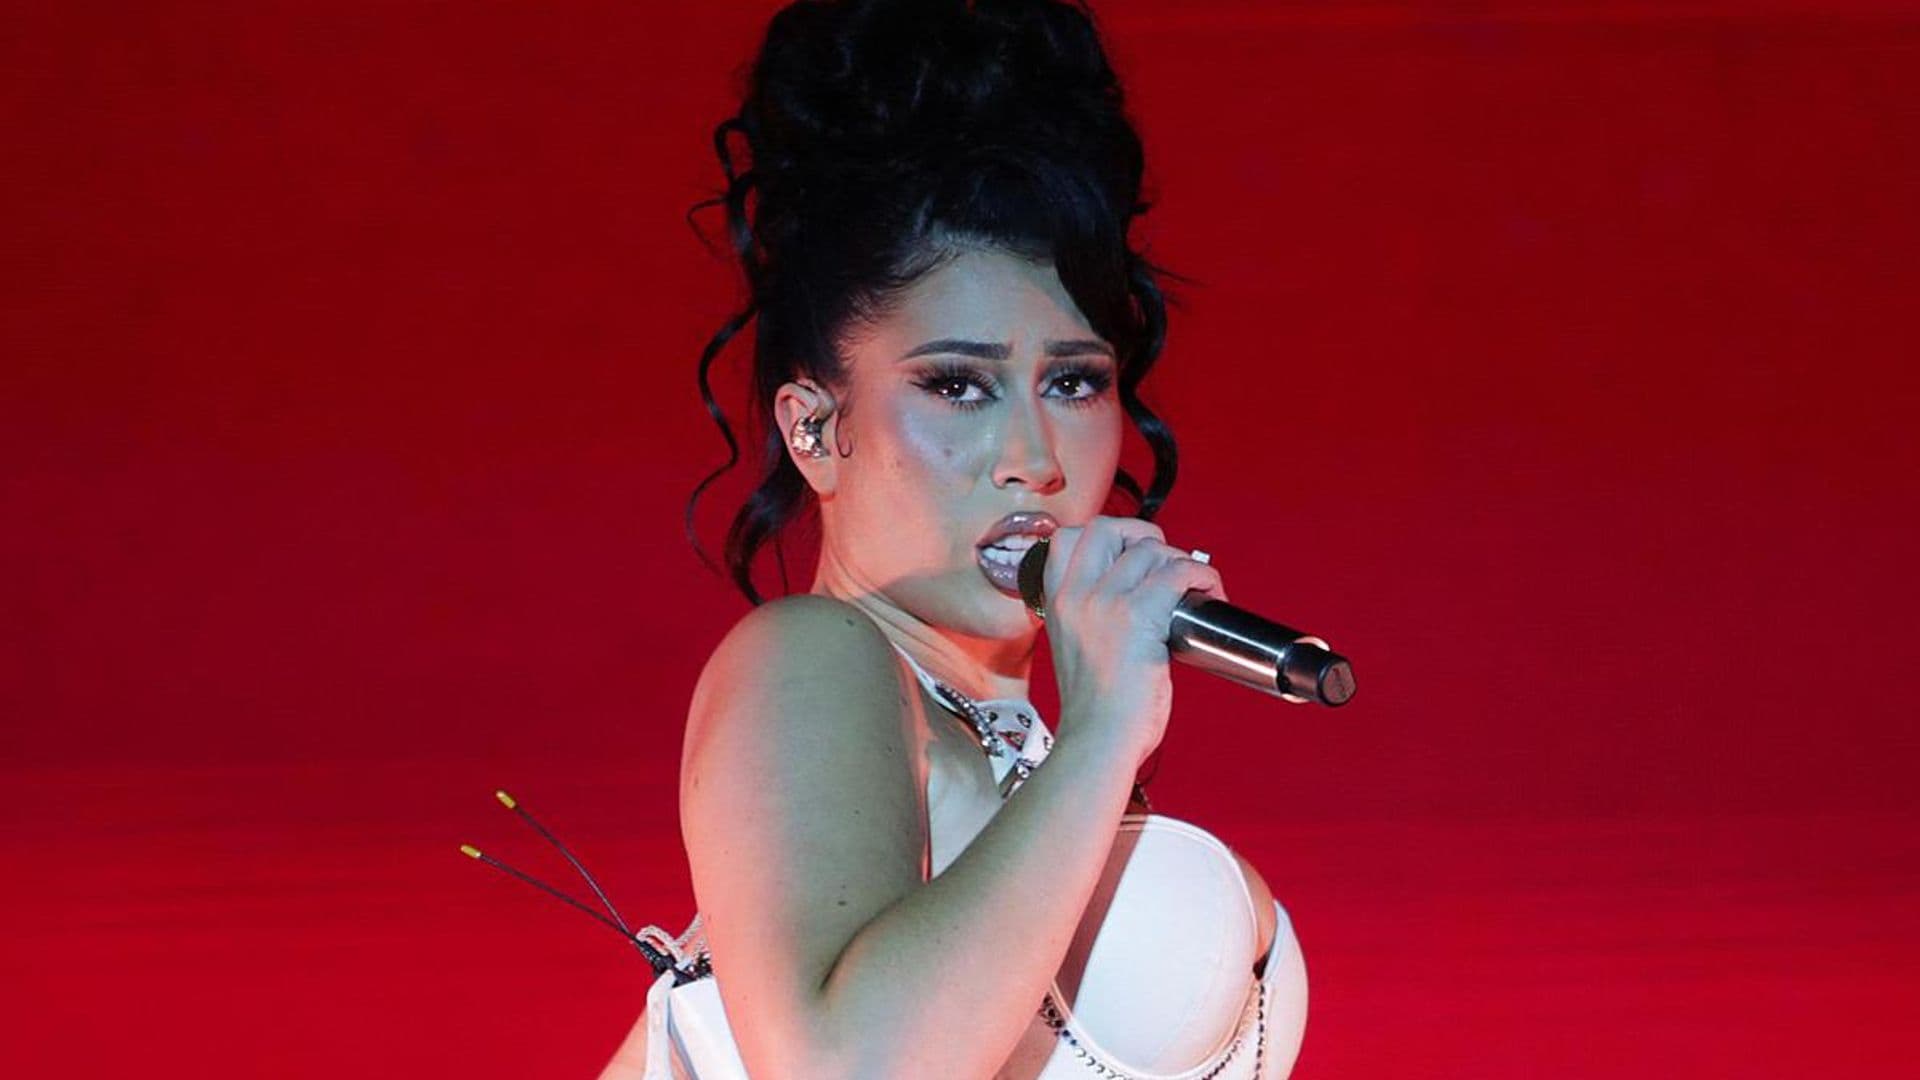 Kali Uchis wants fans to have more ‘empathy’ after difficult moments in Colombia